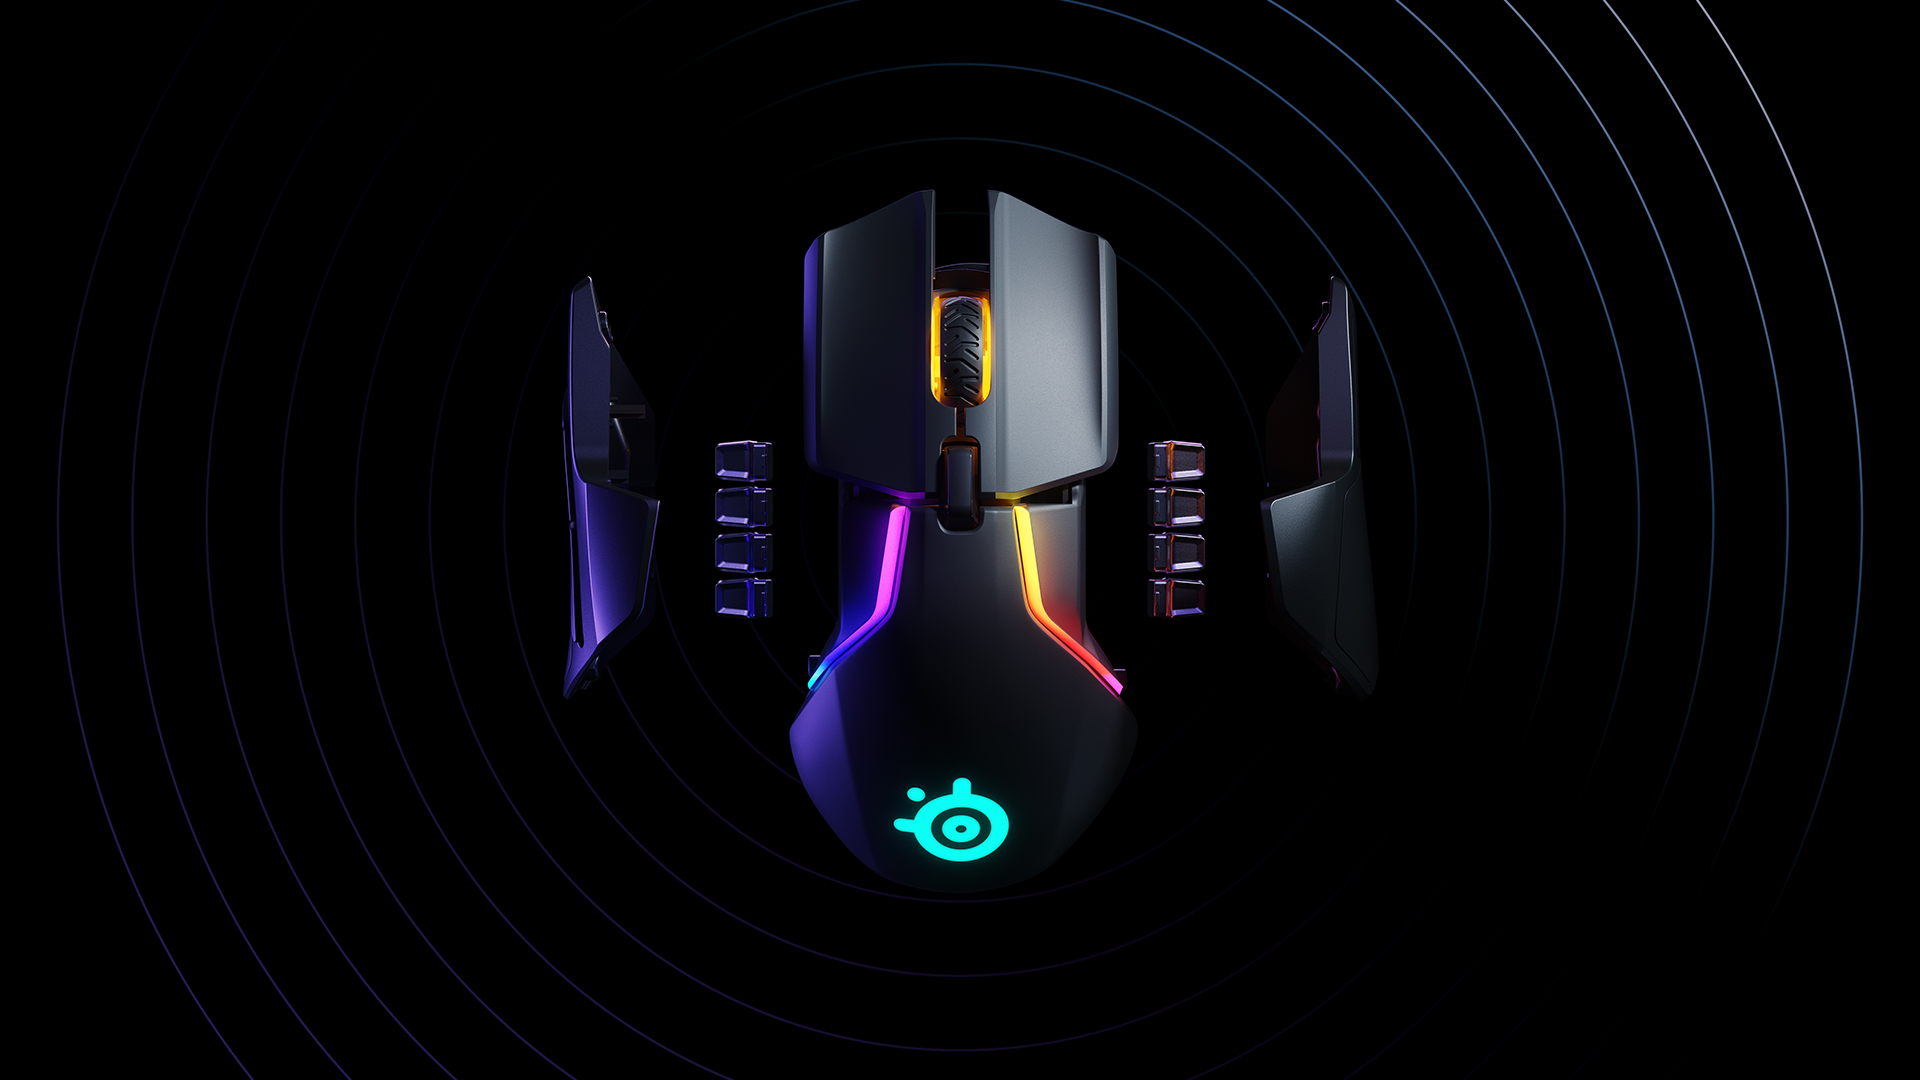 Technologies Steelseries New Wireless Gaming Mouse Promises To Seriously Cut The Lag